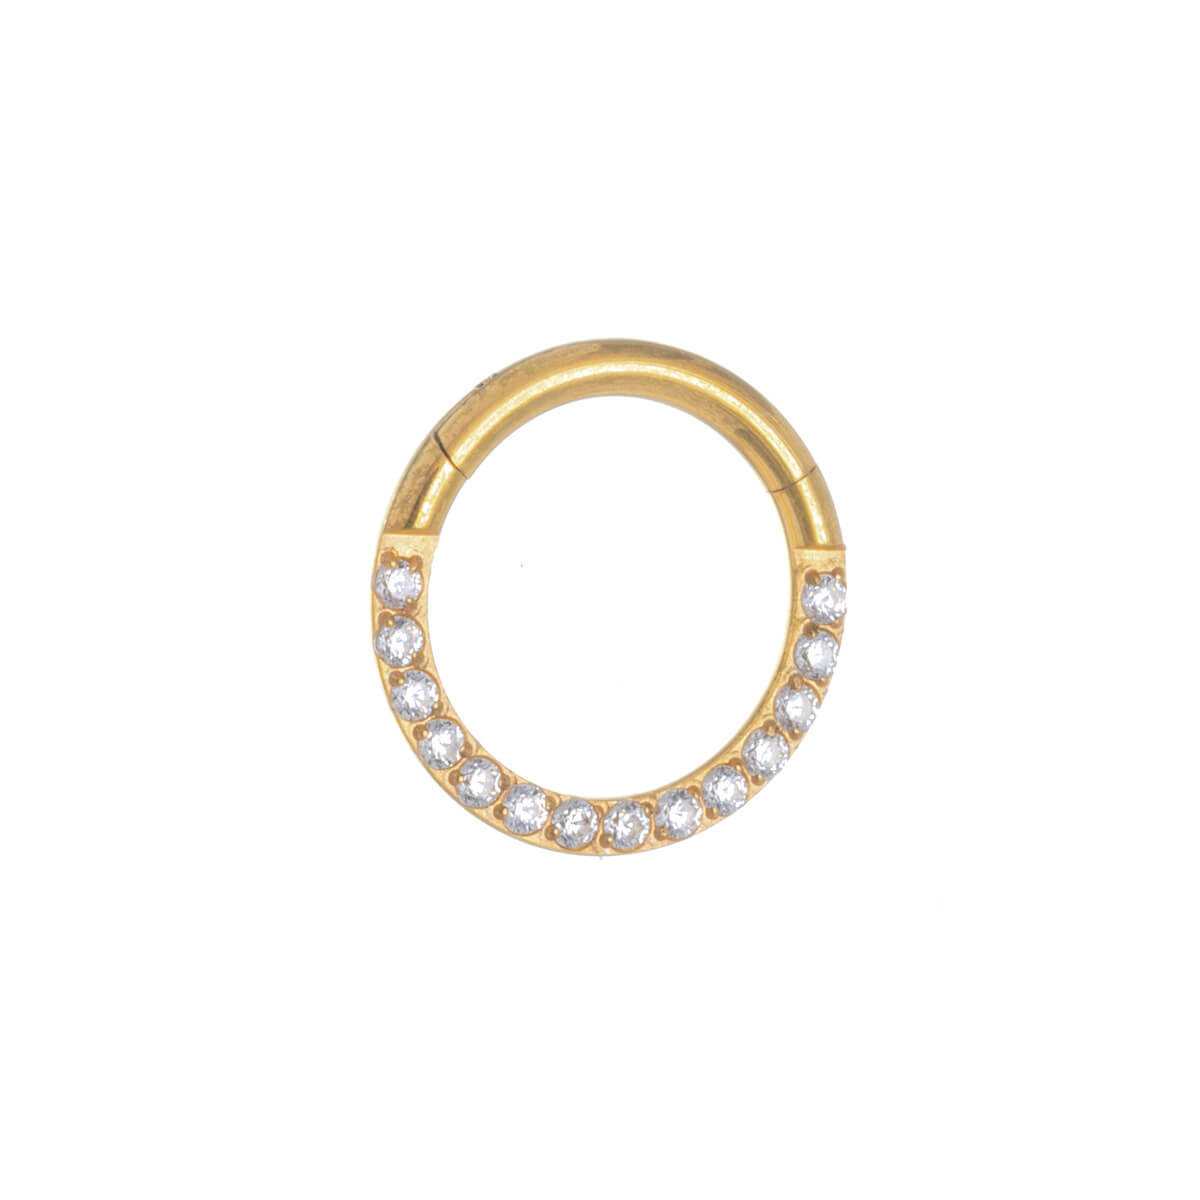 Zirconia stony segment ring with gold plated clicker 1.2mm (PVD Titanium G23)